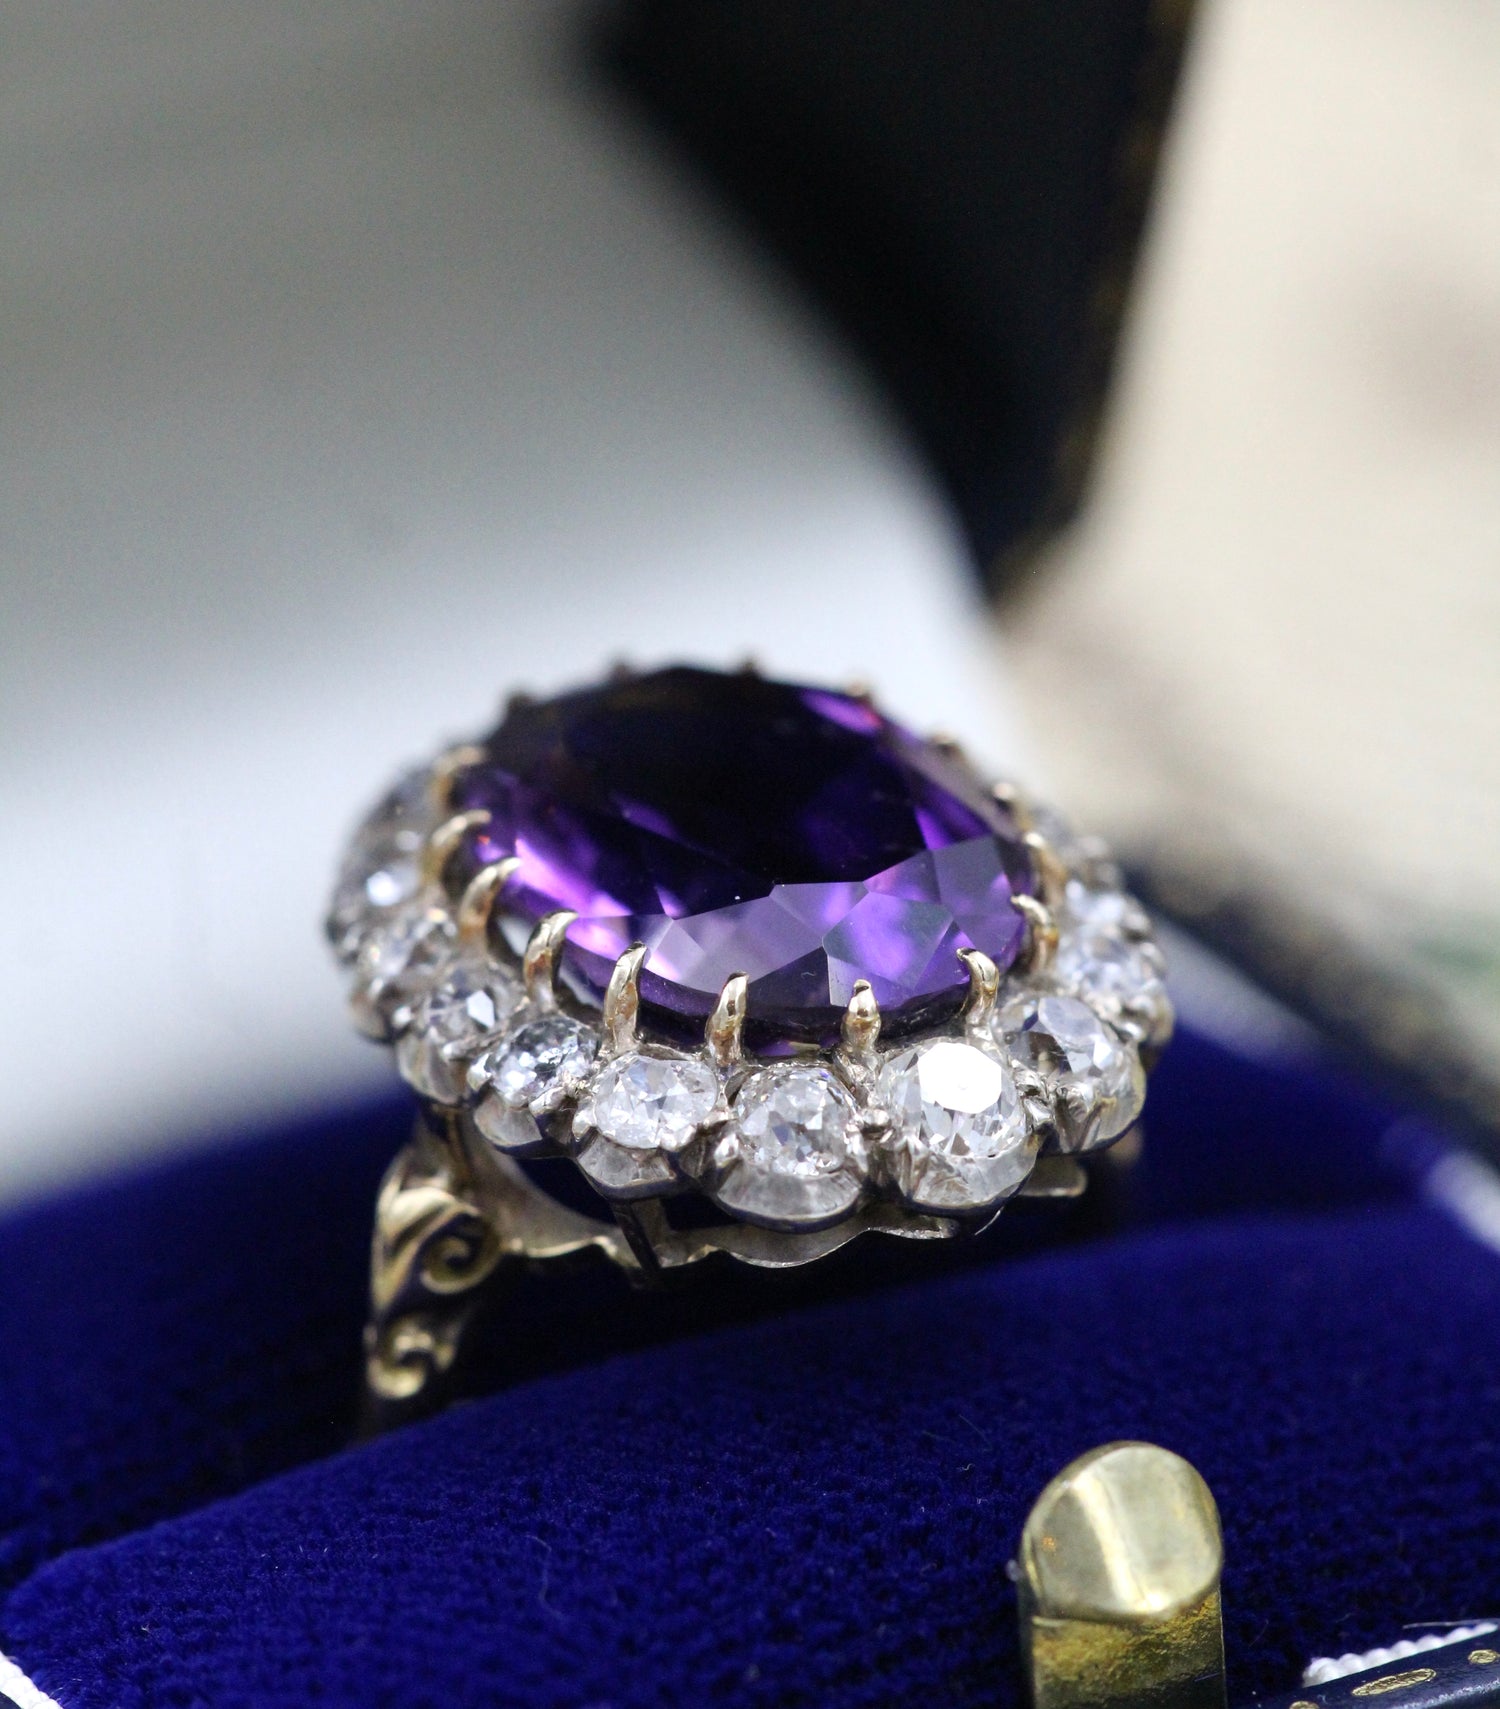 An Amethyst and Diamond Cluster Ring set with an Oval Amethyst, surrounded by 2.00 Carats of "Old Mine" Cut (Cushion), Shaped Diamonds, mounted in Silver on Gold, stamped 18 ct. Circa 1900. - Robin Haydock Antiques